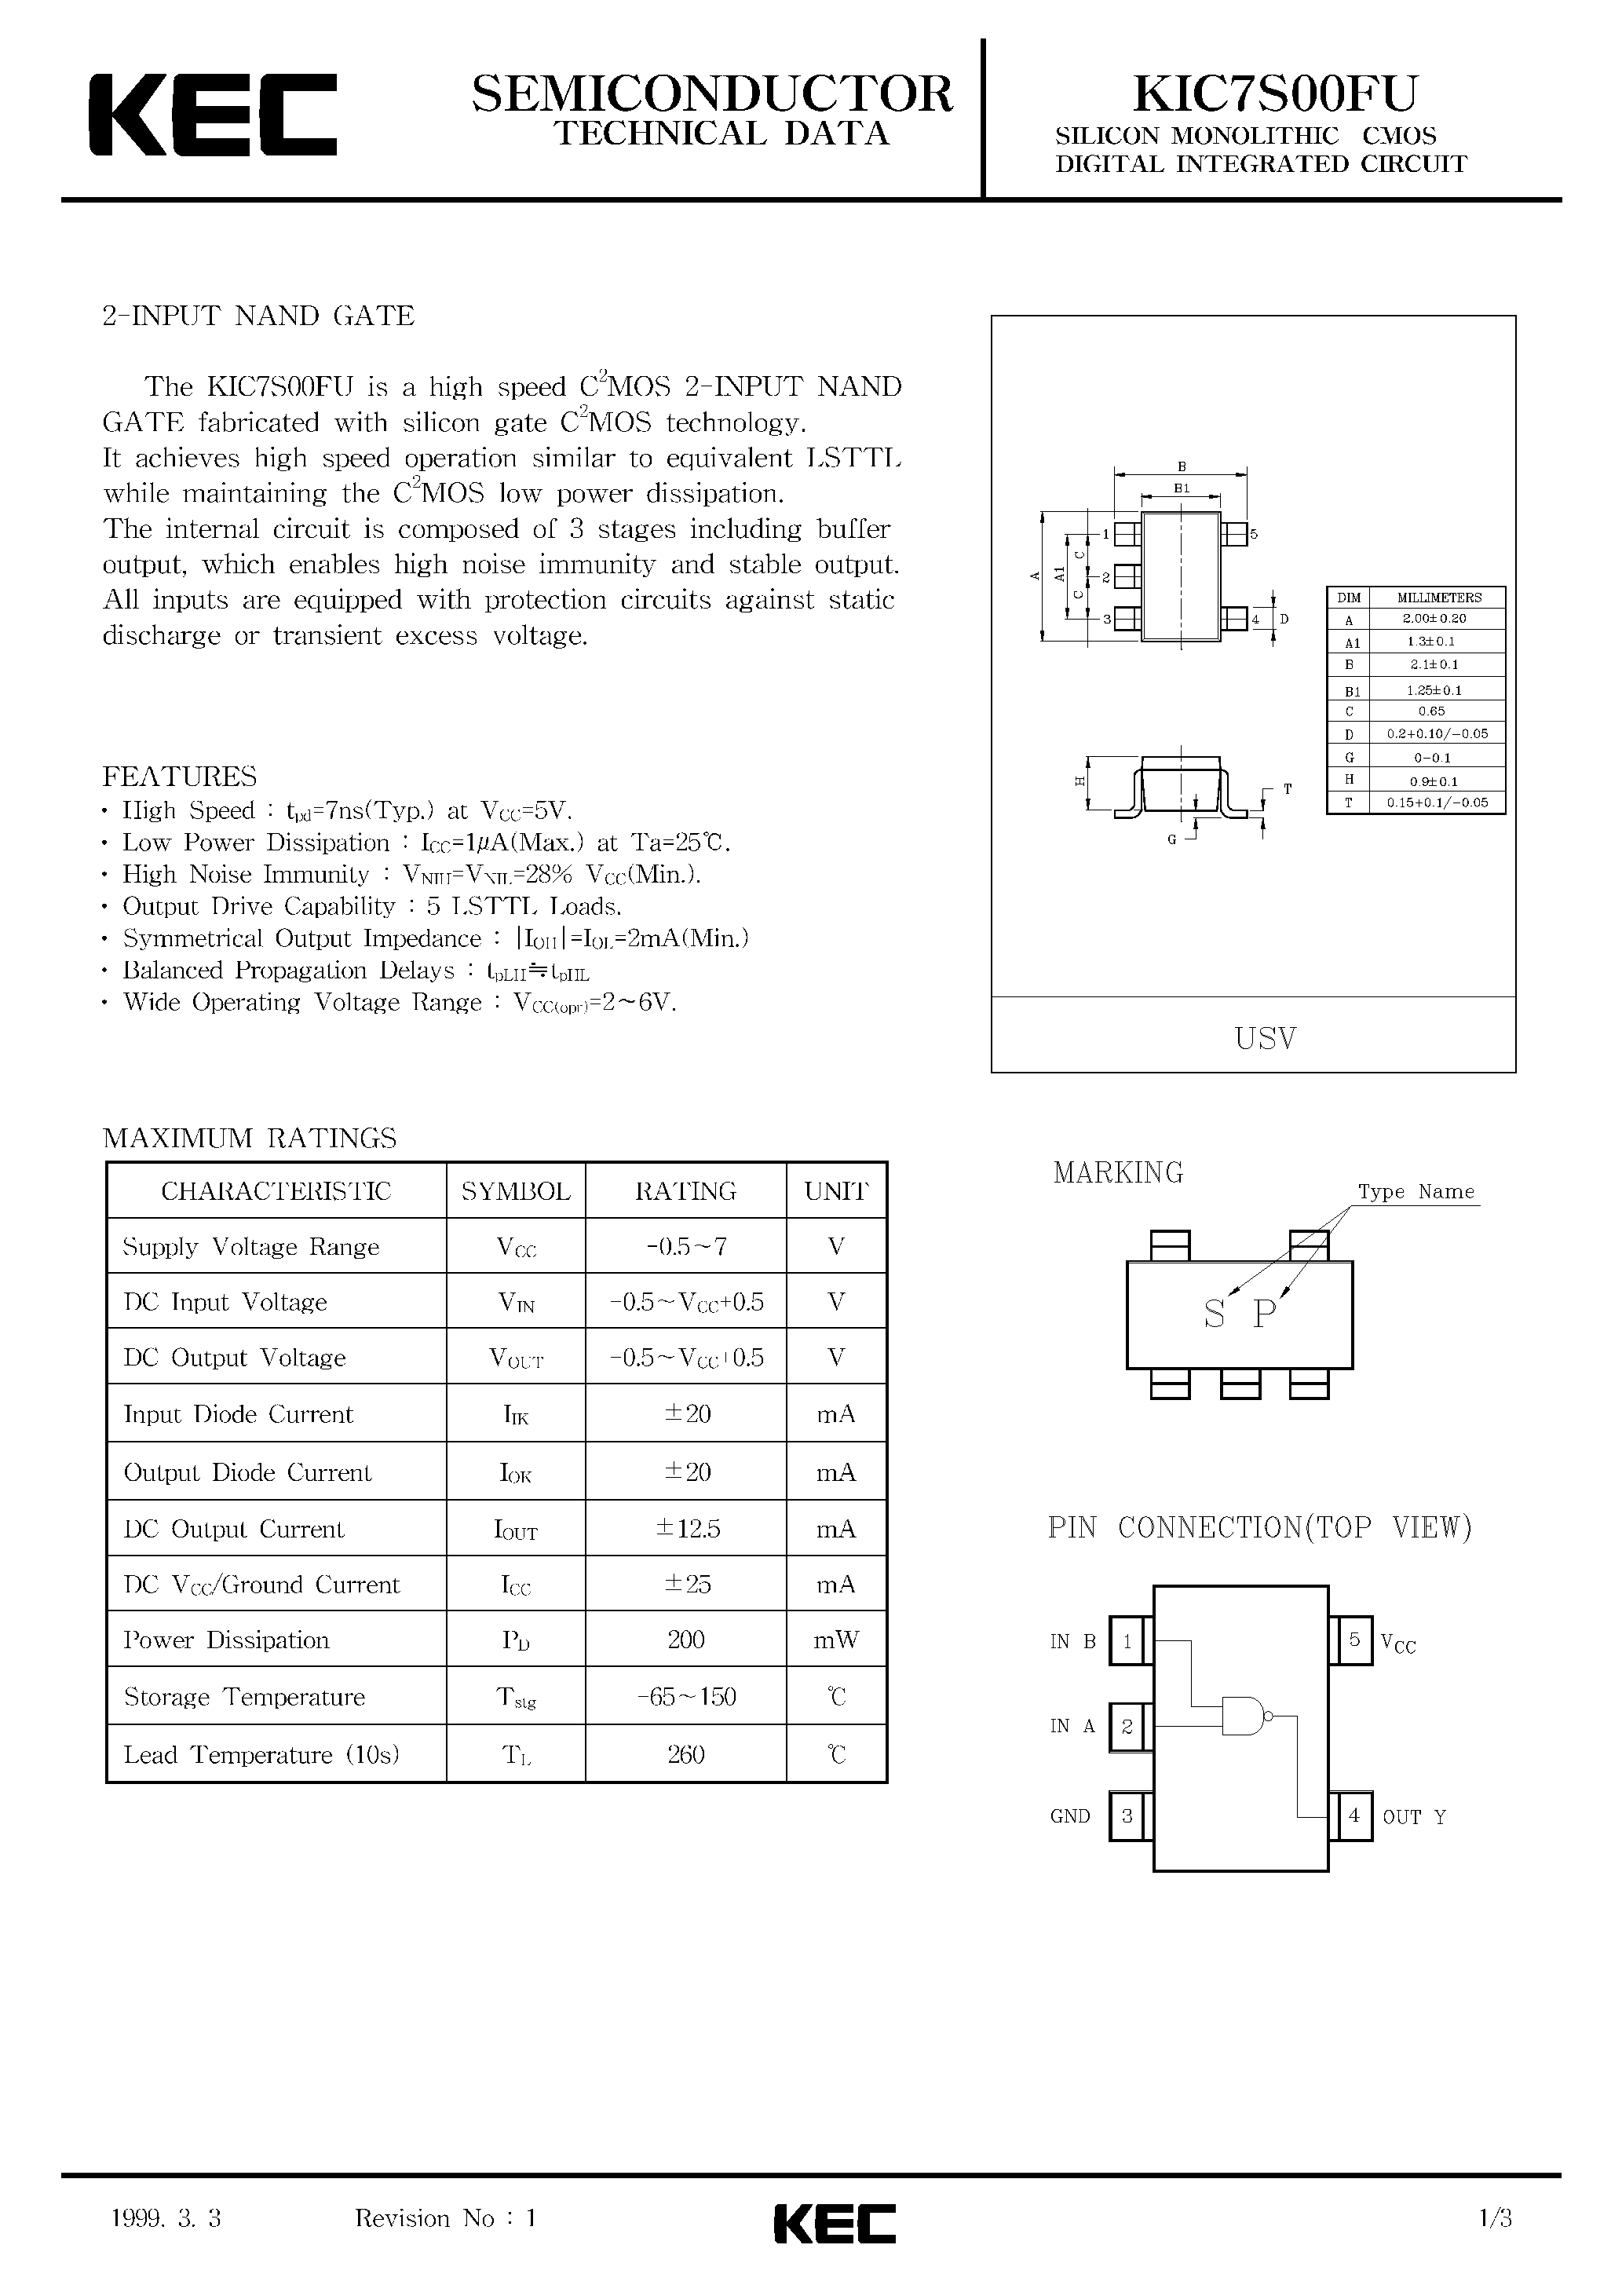 Datasheet KIC7S00FU - SILICON MONOLITHIC CMOS DIGITAL INTEGRATED CIRCUIT(2-INPUT NAND GATE) page 1